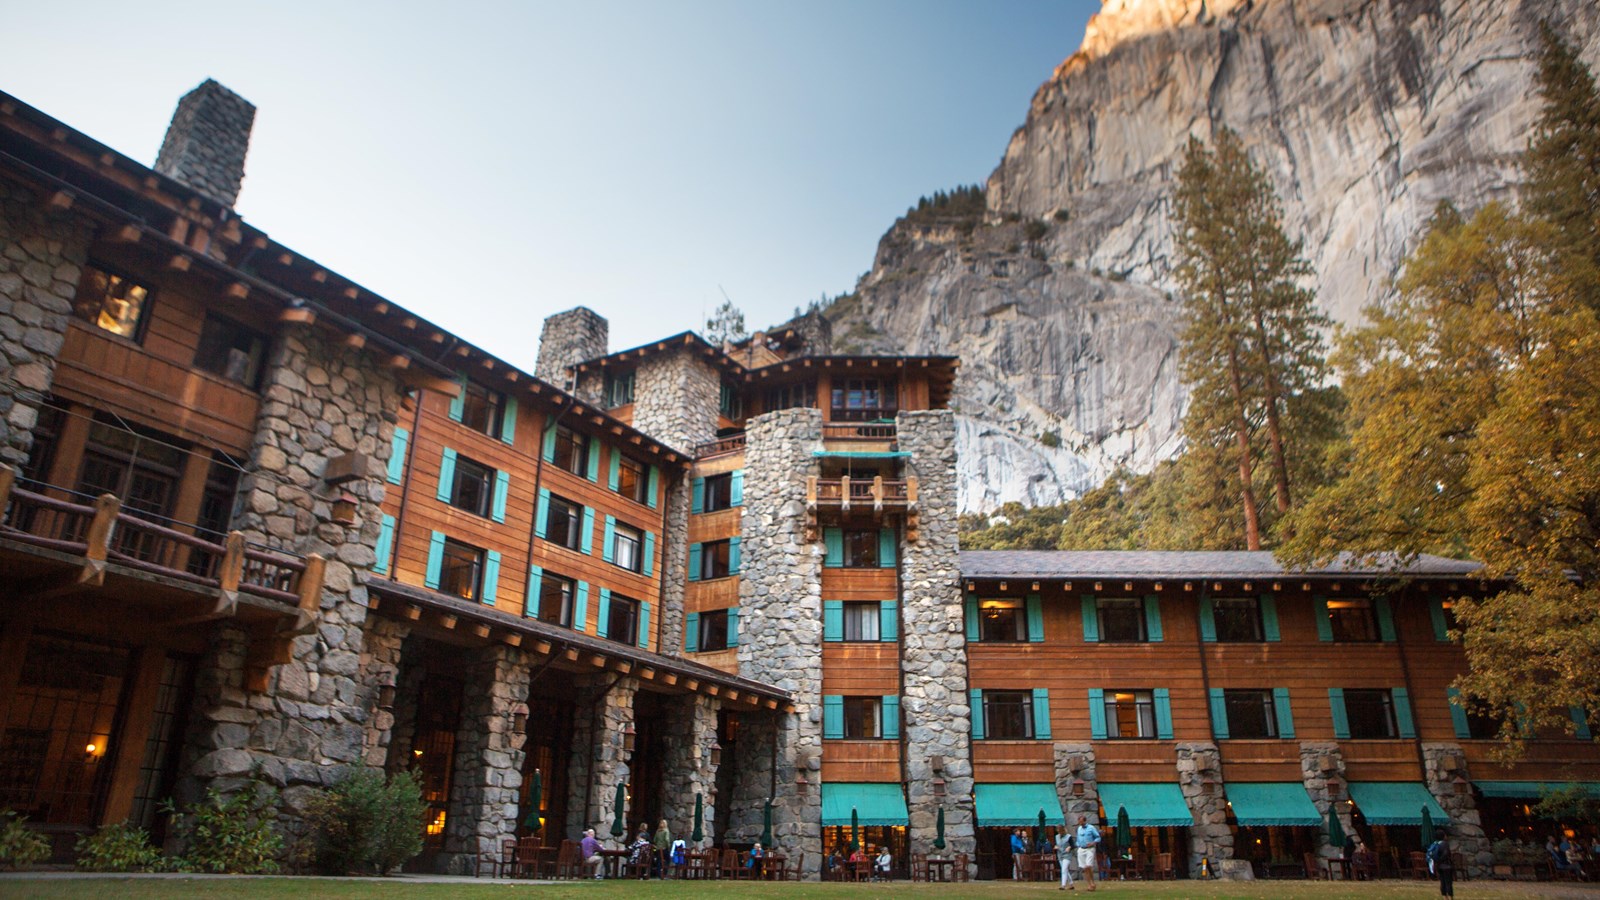 A sheer cliff face serves as a backdrop behind a building made of stone and wooden planks.